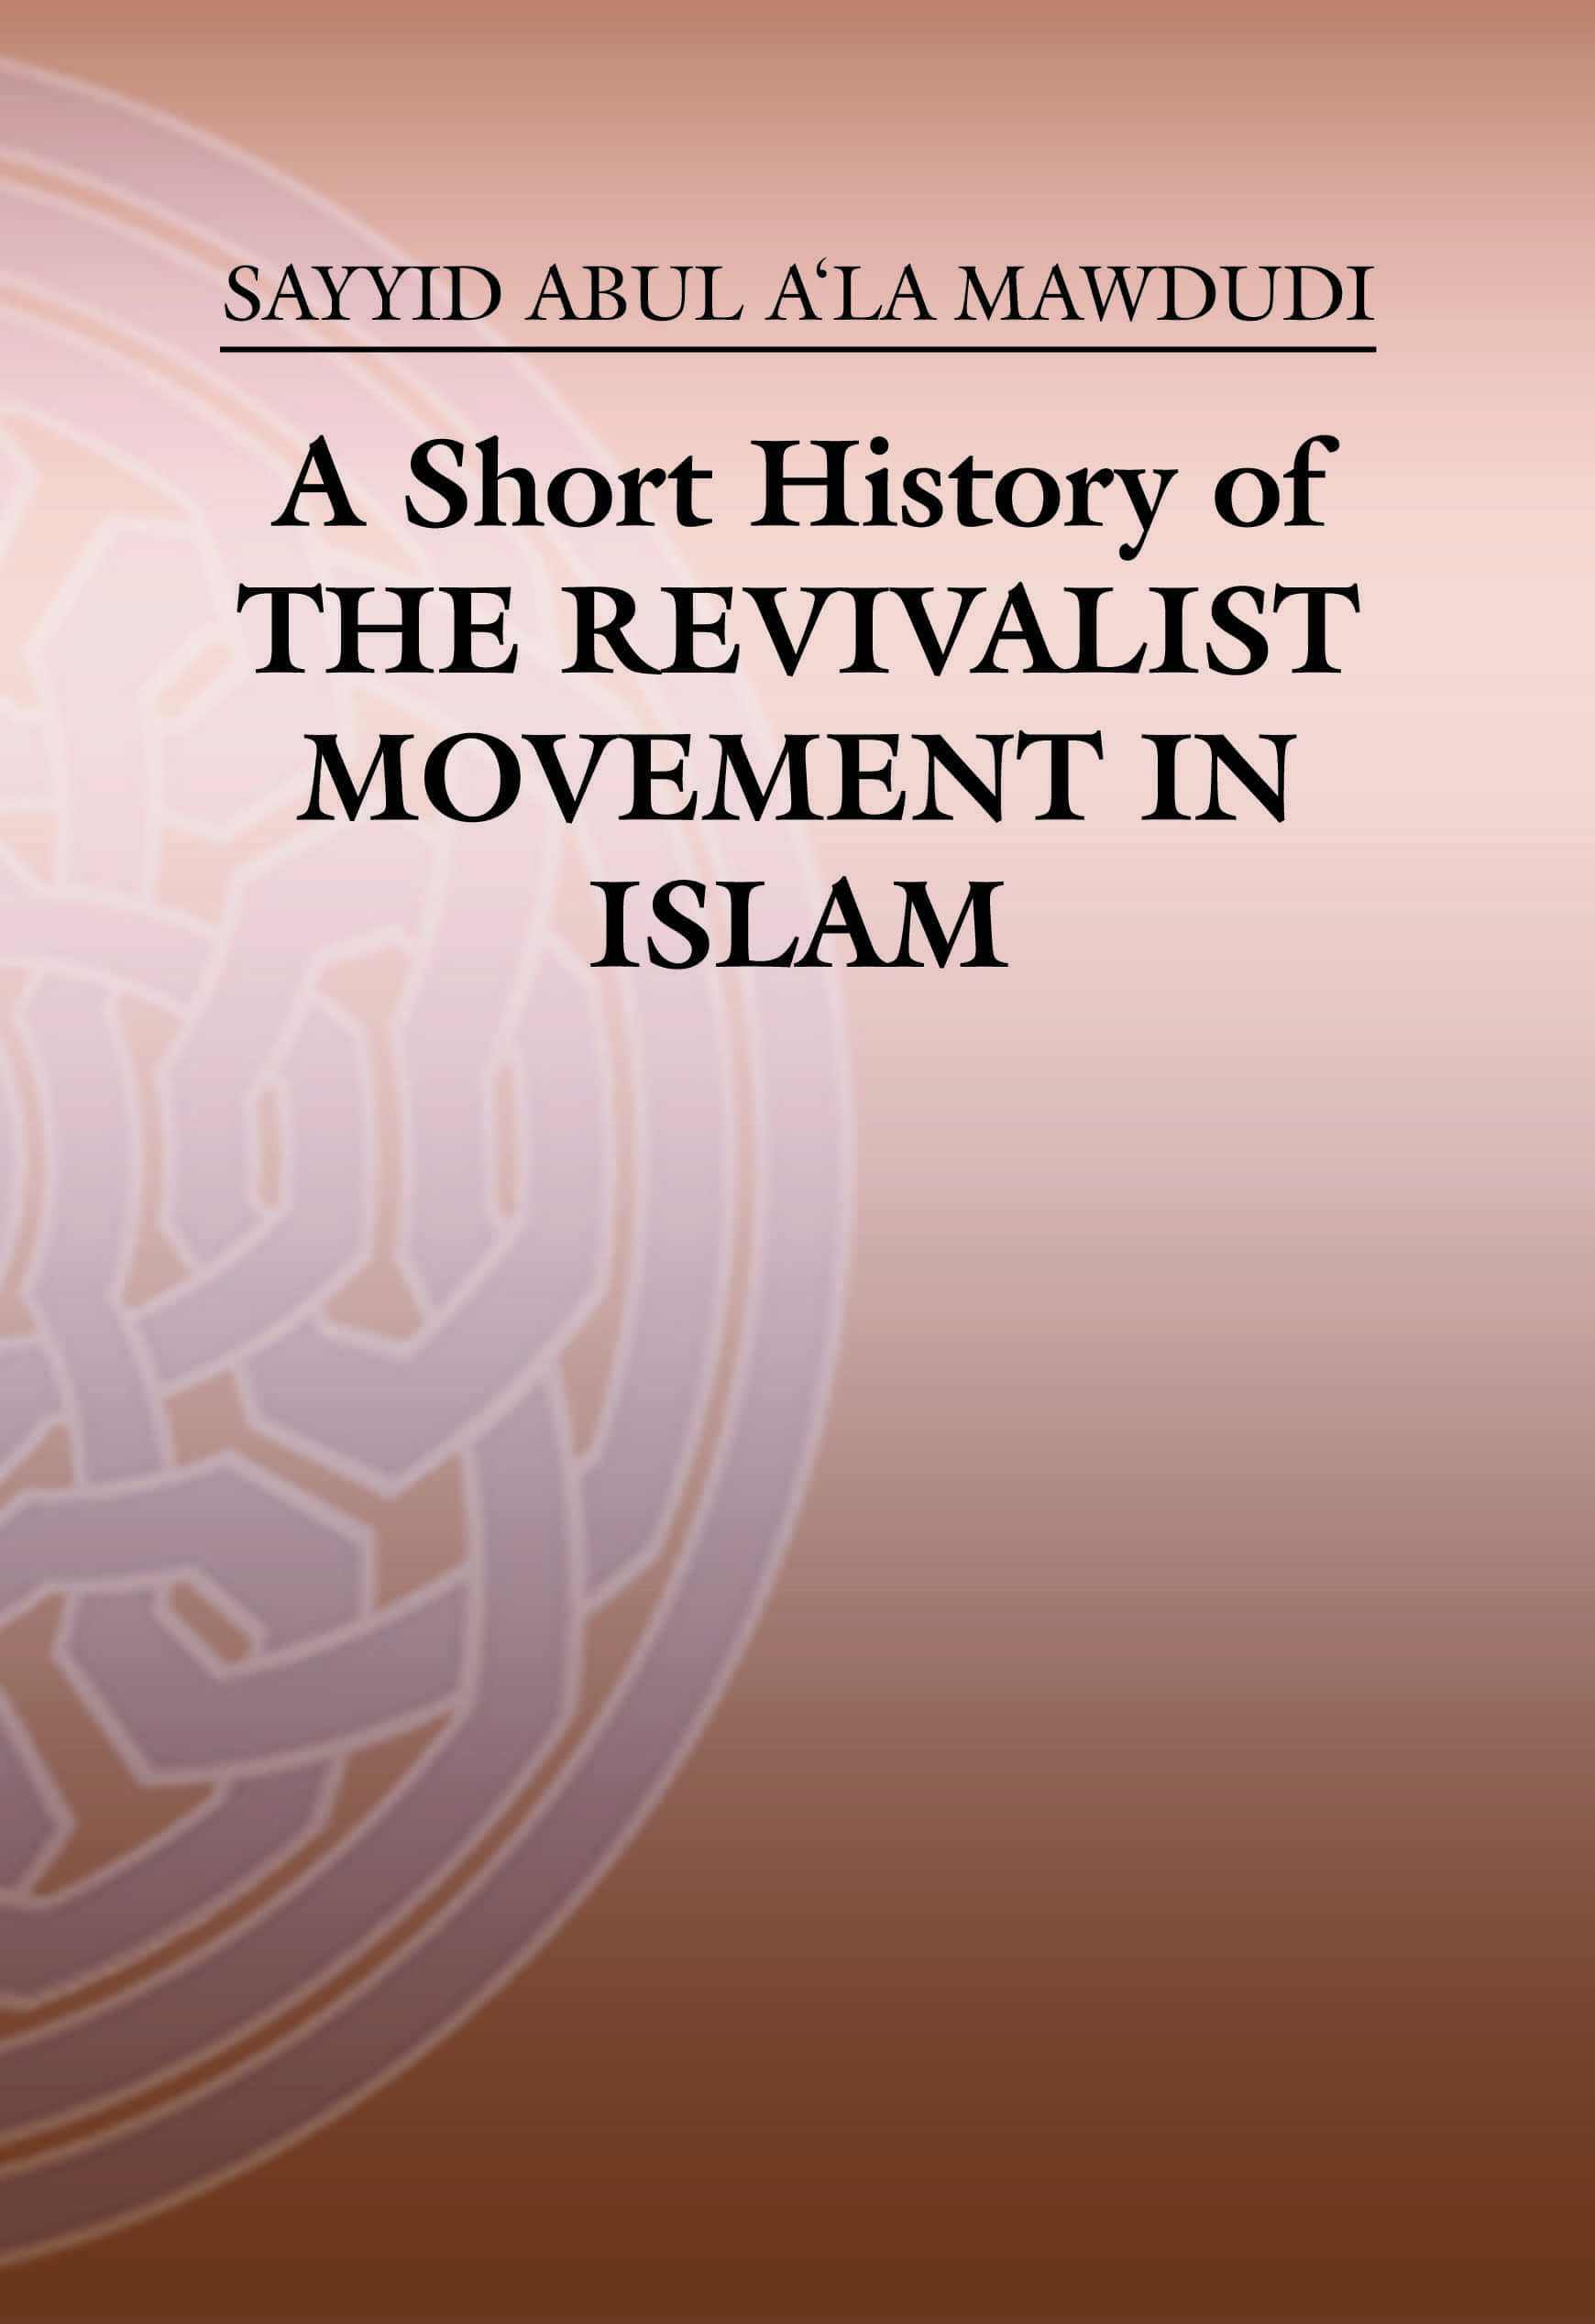 A Short History of the Rivivalist Movement in Islam